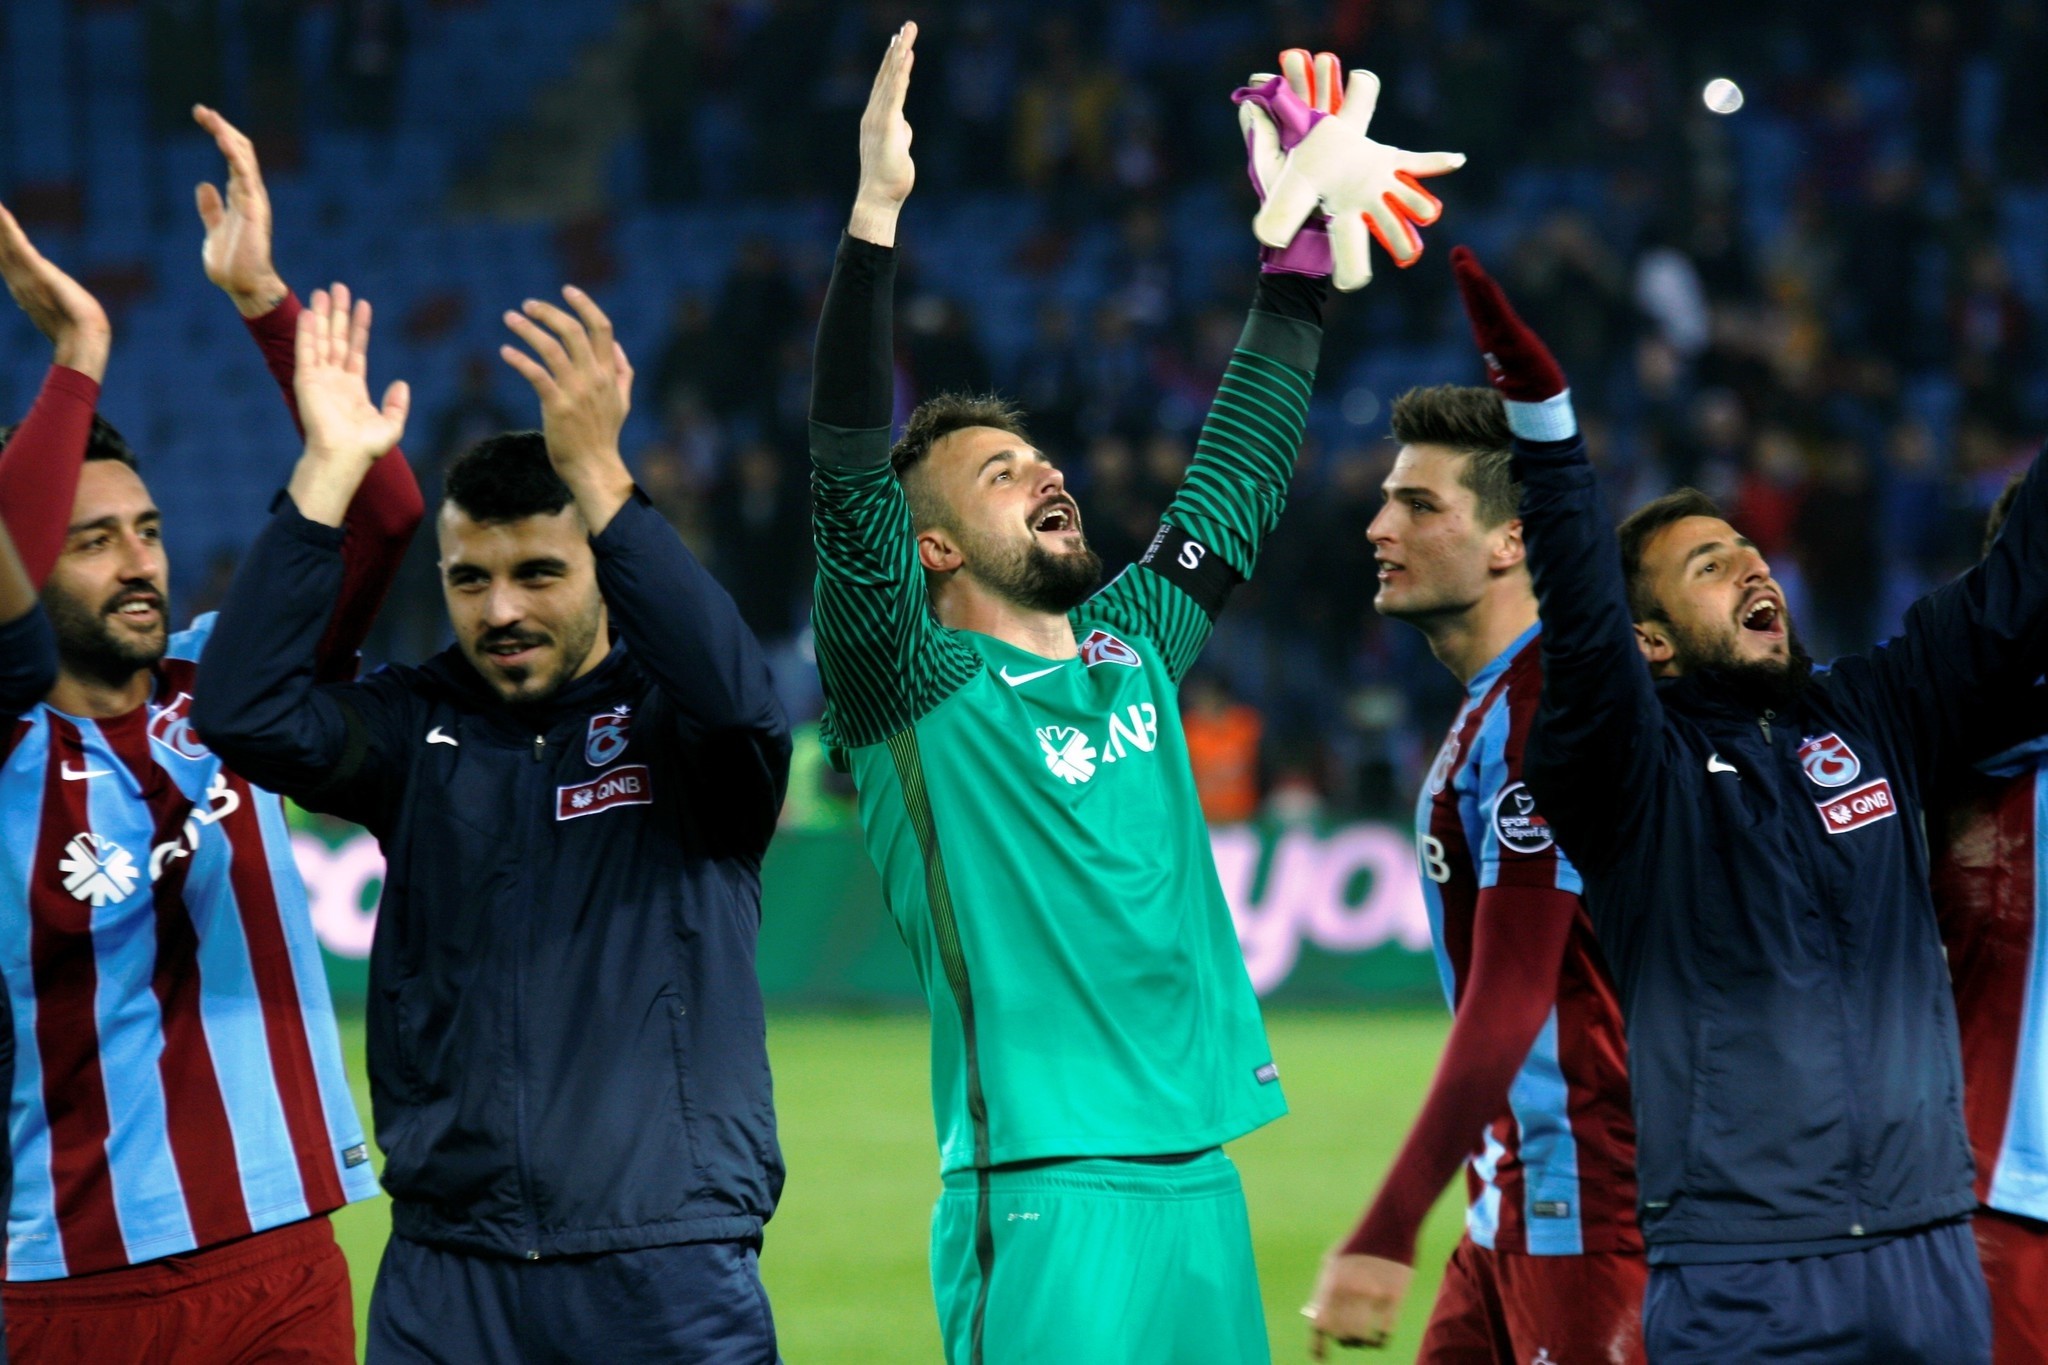 Trabzonspor's incredible rise was well complemented by Saturday night's win, when they cruised past Galatasaray in Trabzon.